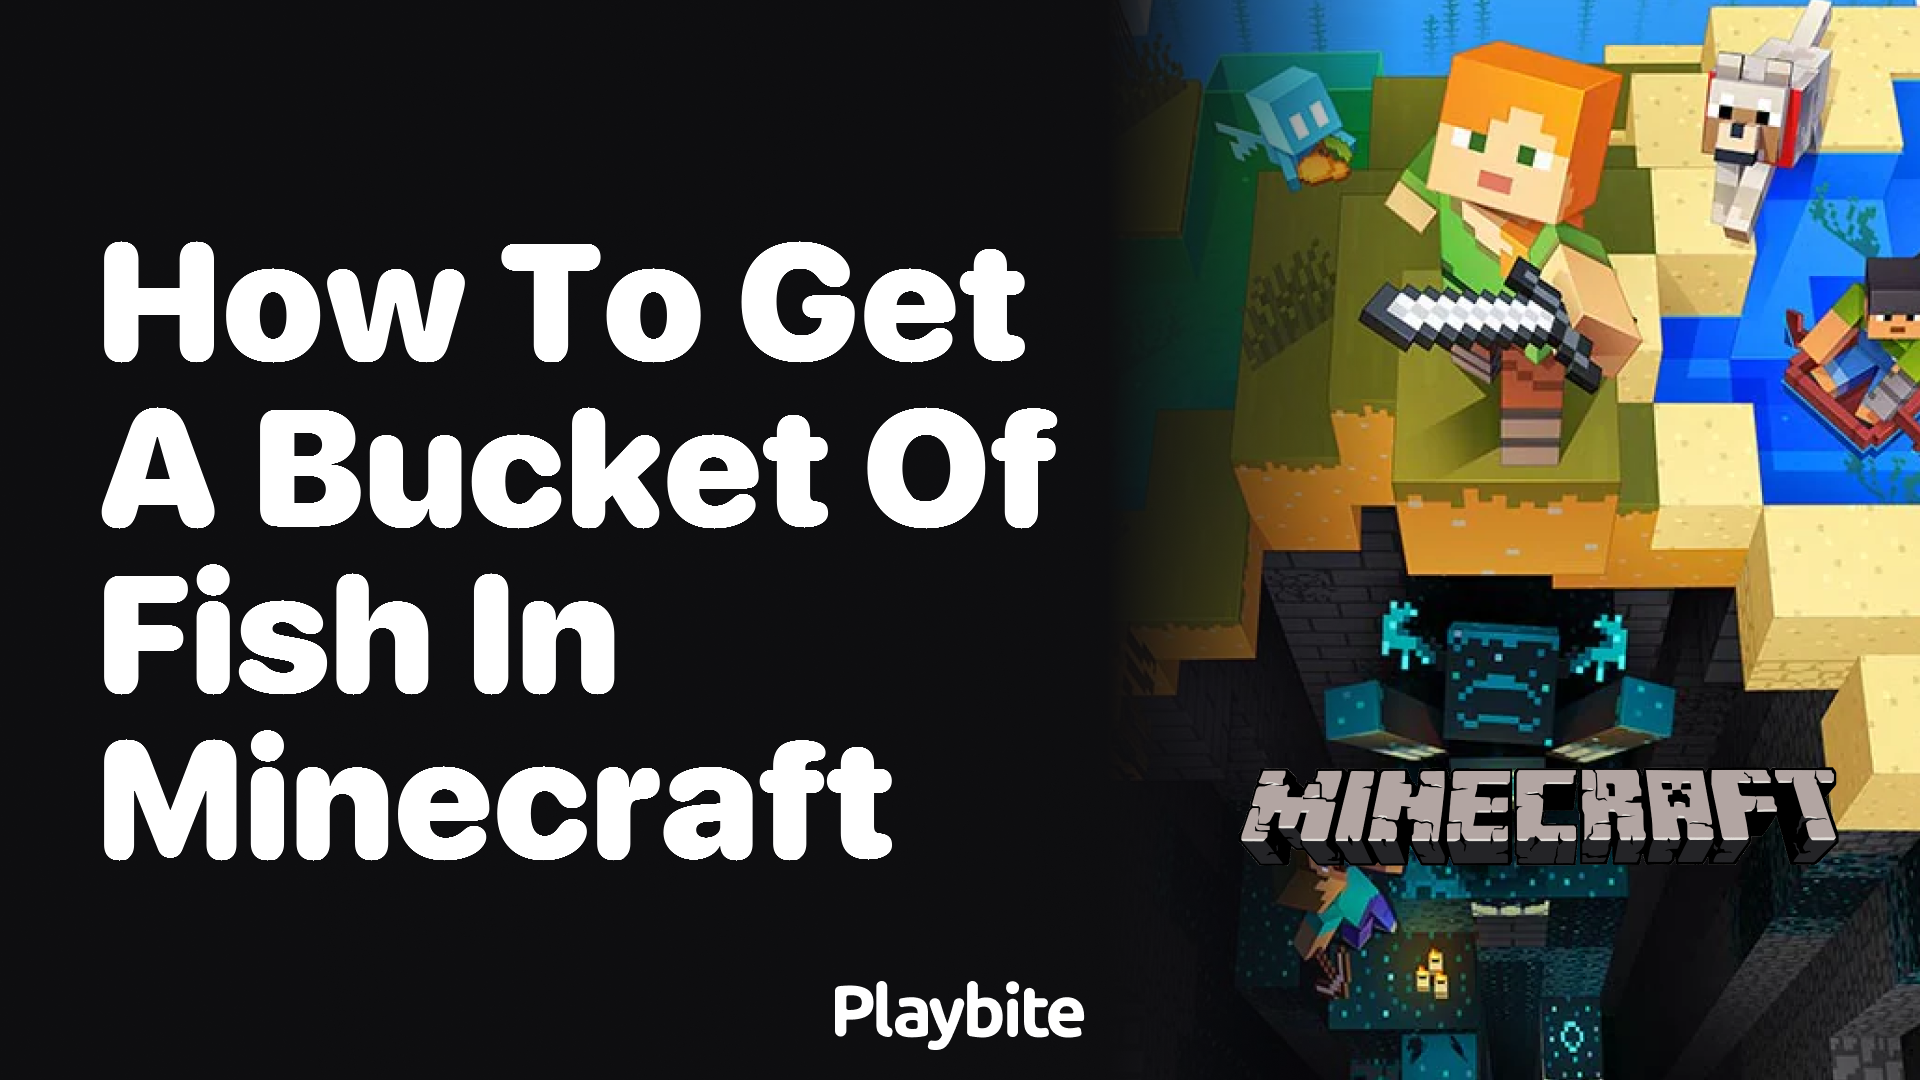 How to Get a Bucket of Fish in Minecraft - Playbite